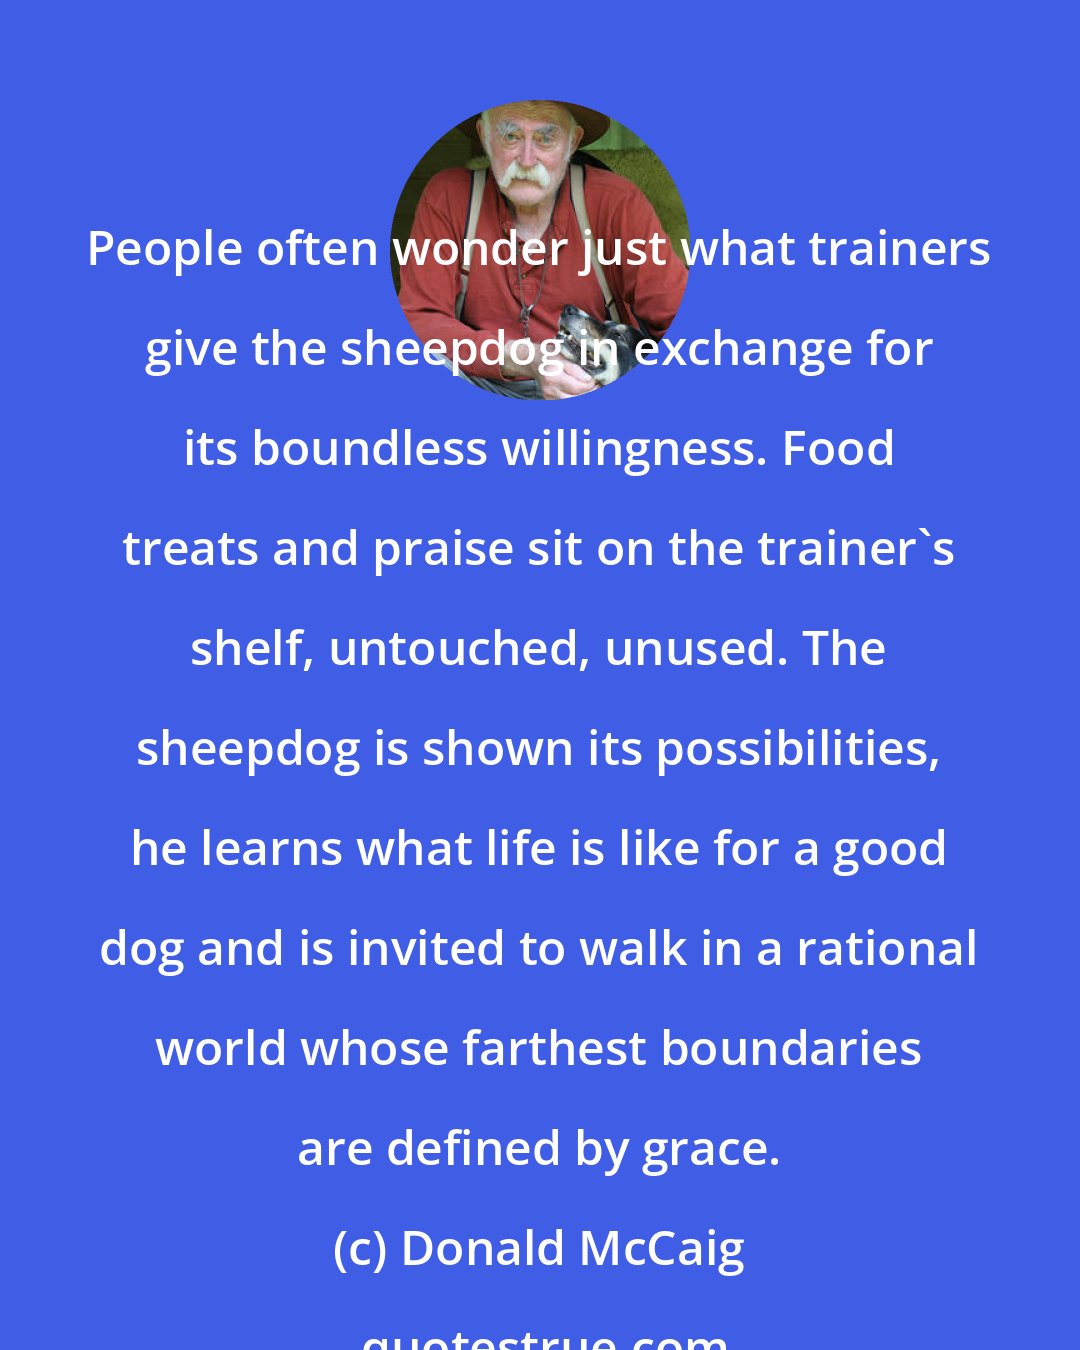 Donald McCaig: People often wonder just what trainers give the sheepdog in exchange for its boundless willingness. Food treats and praise sit on the trainer's shelf, untouched, unused. The sheepdog is shown its possibilities, he learns what life is like for a good dog and is invited to walk in a rational world whose farthest boundaries are defined by grace.